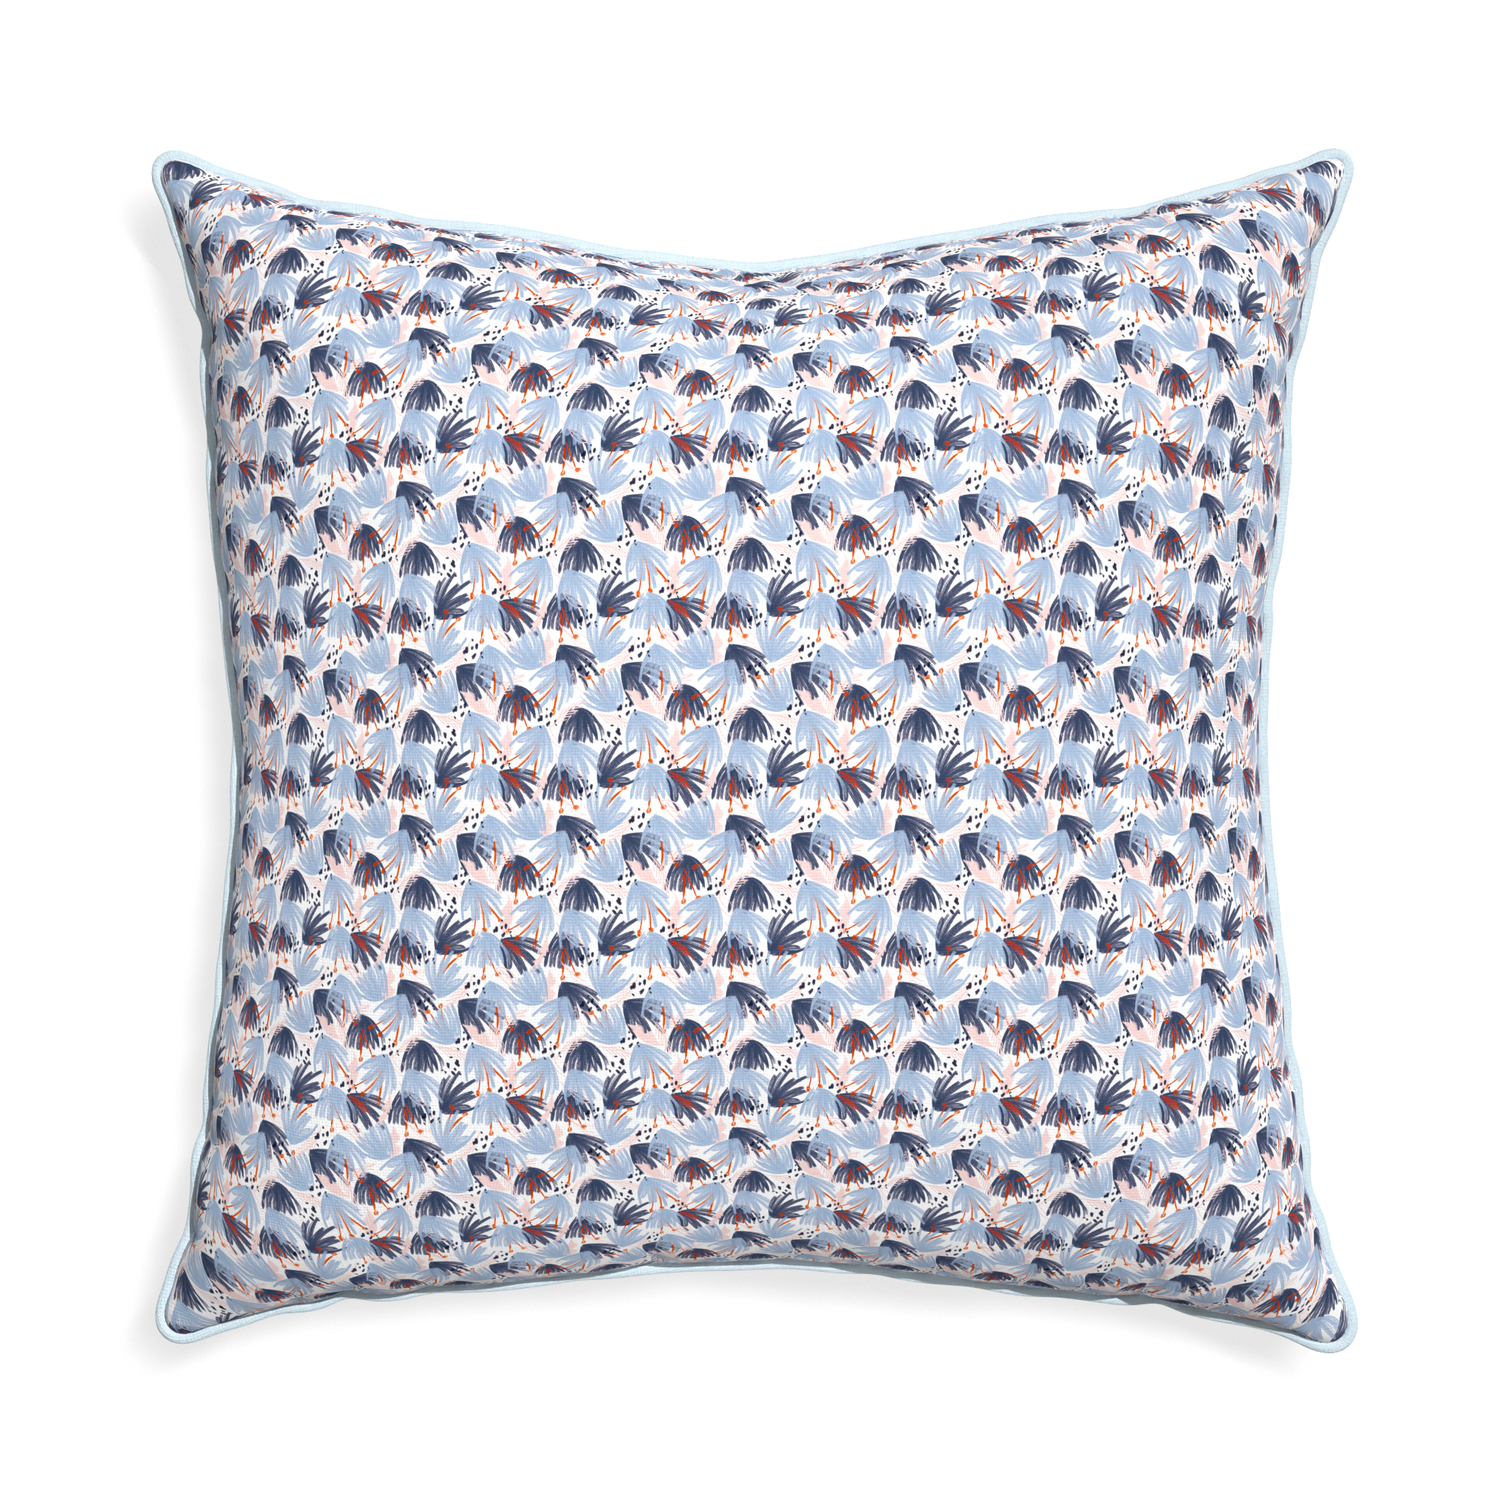 Euro-sham eden blue custom pillow with powder piping on white background